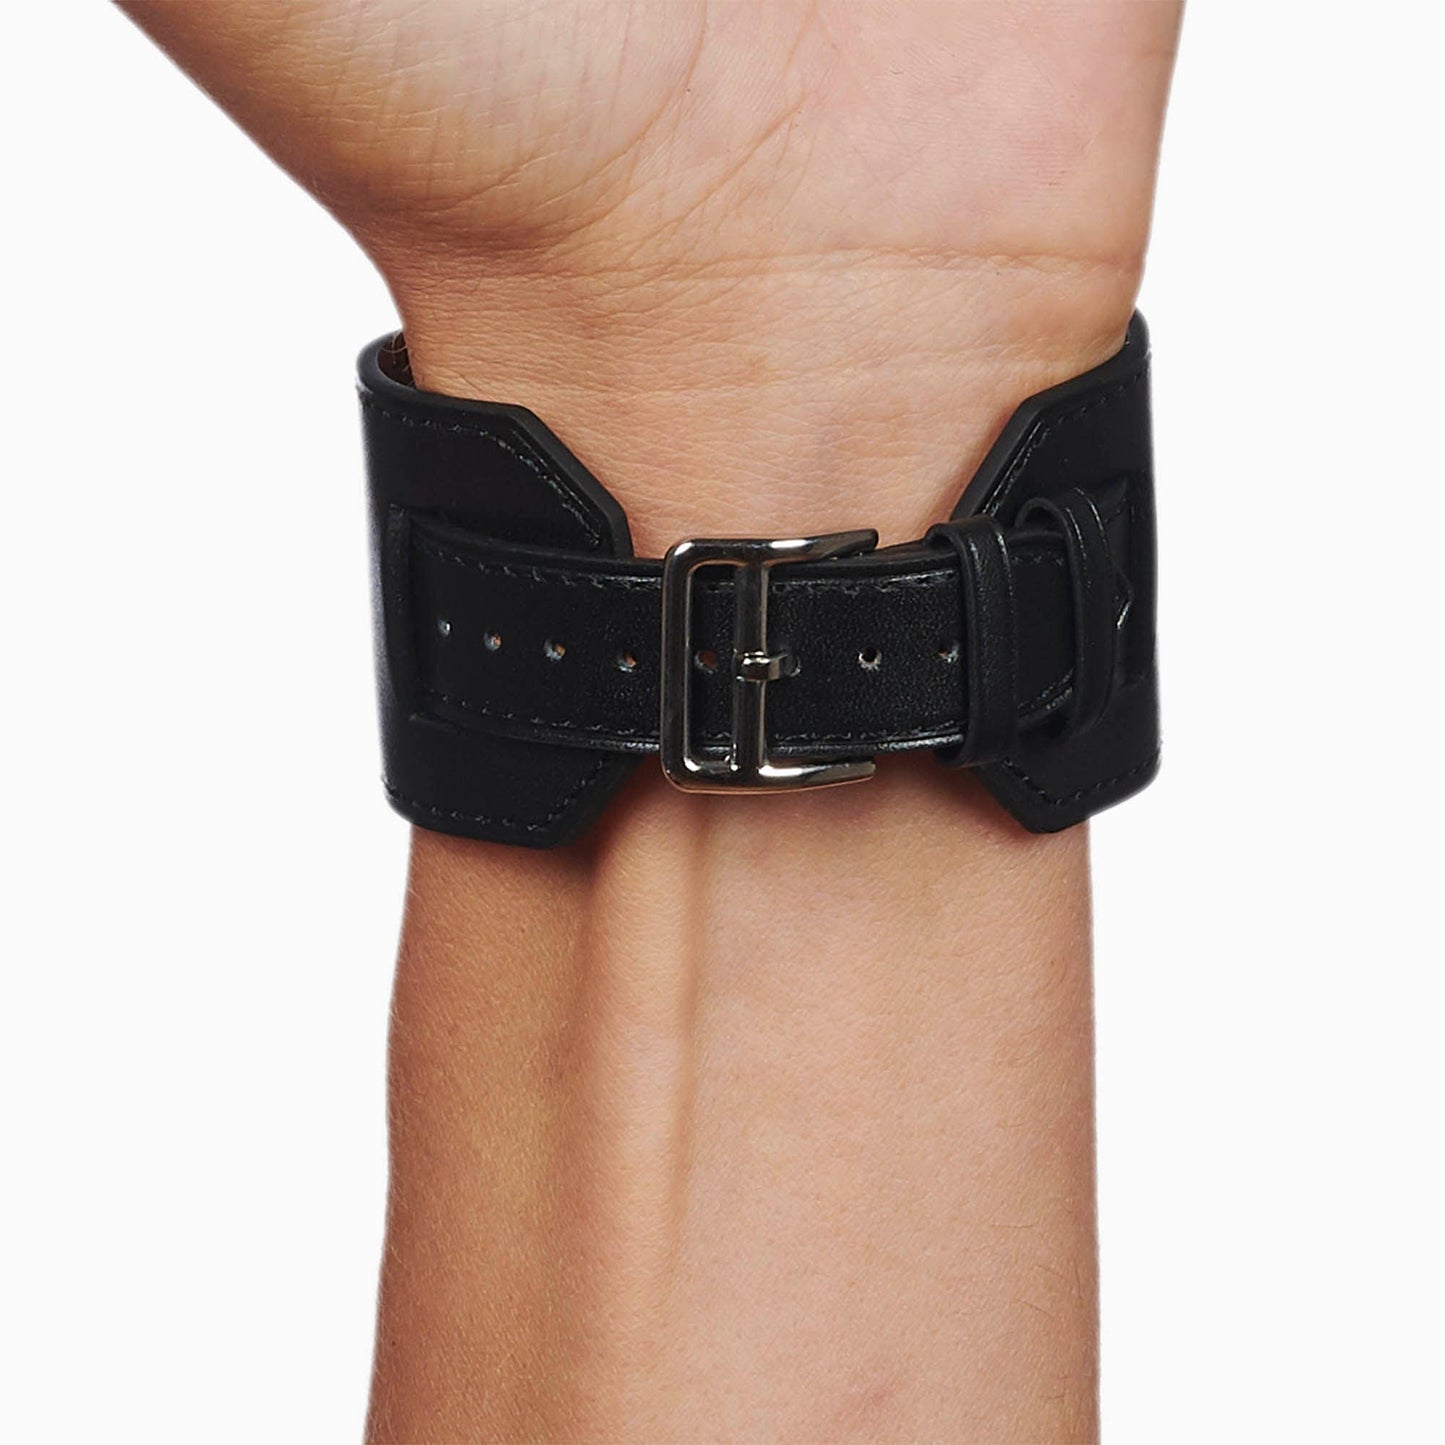 Noir Leather Cuff for Apple Watch